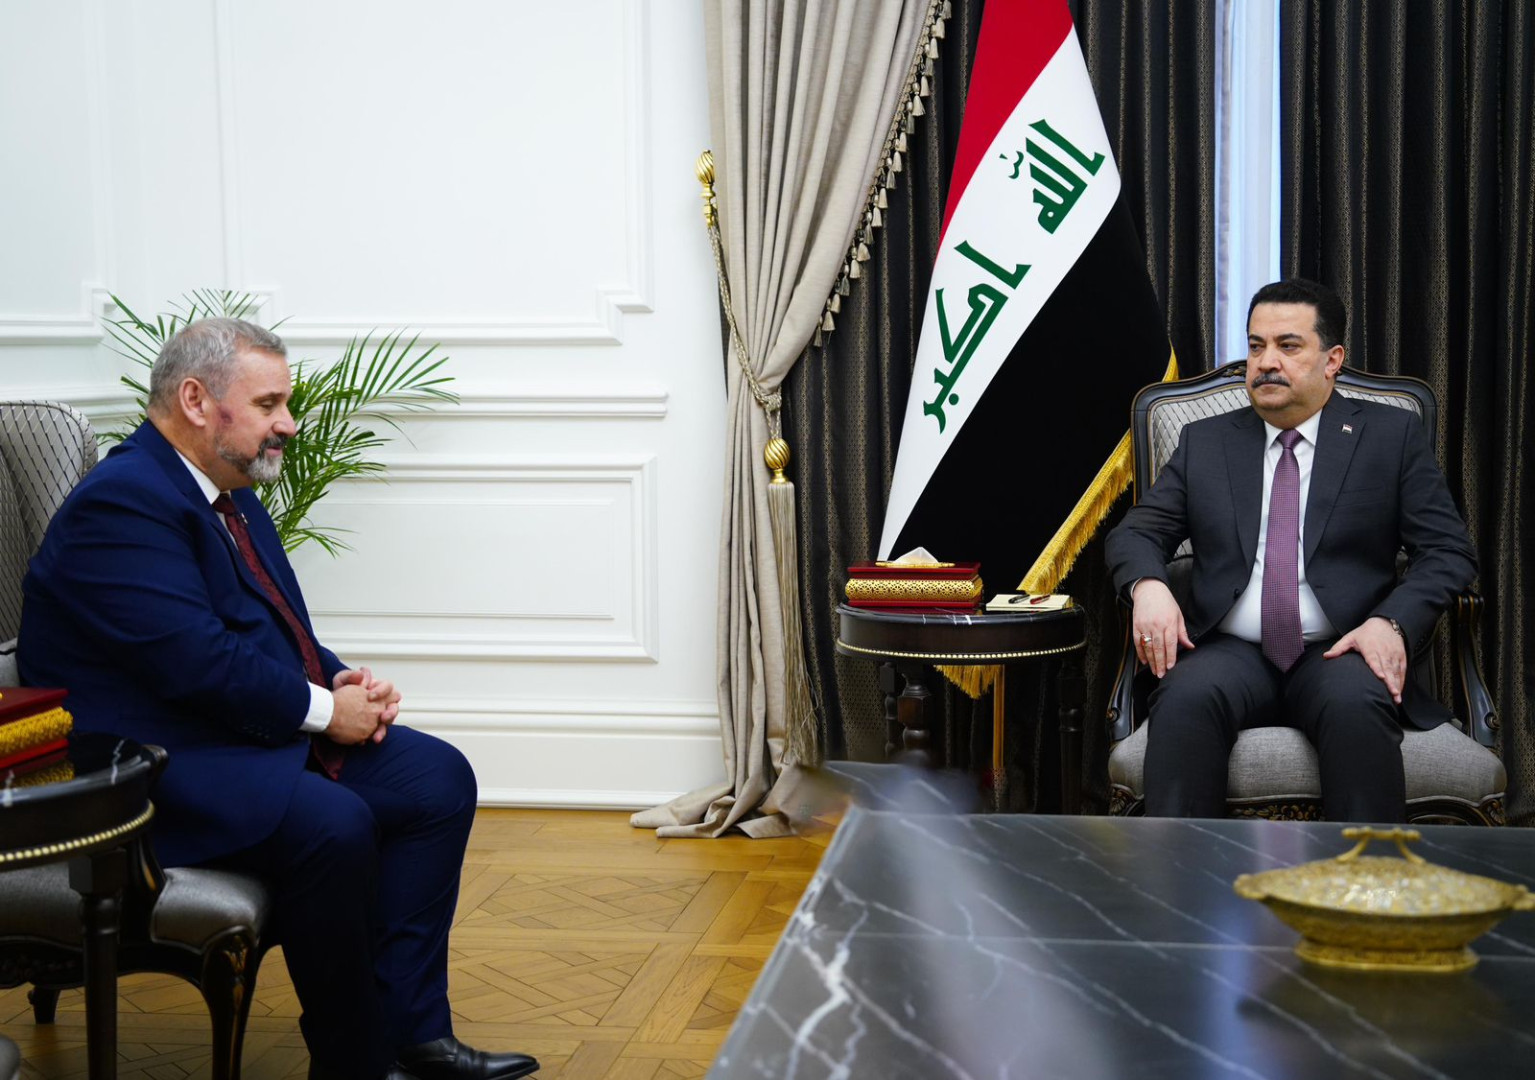 Al Sudani expresses Iraq's desire to advance its "distinguished" relations with the EU